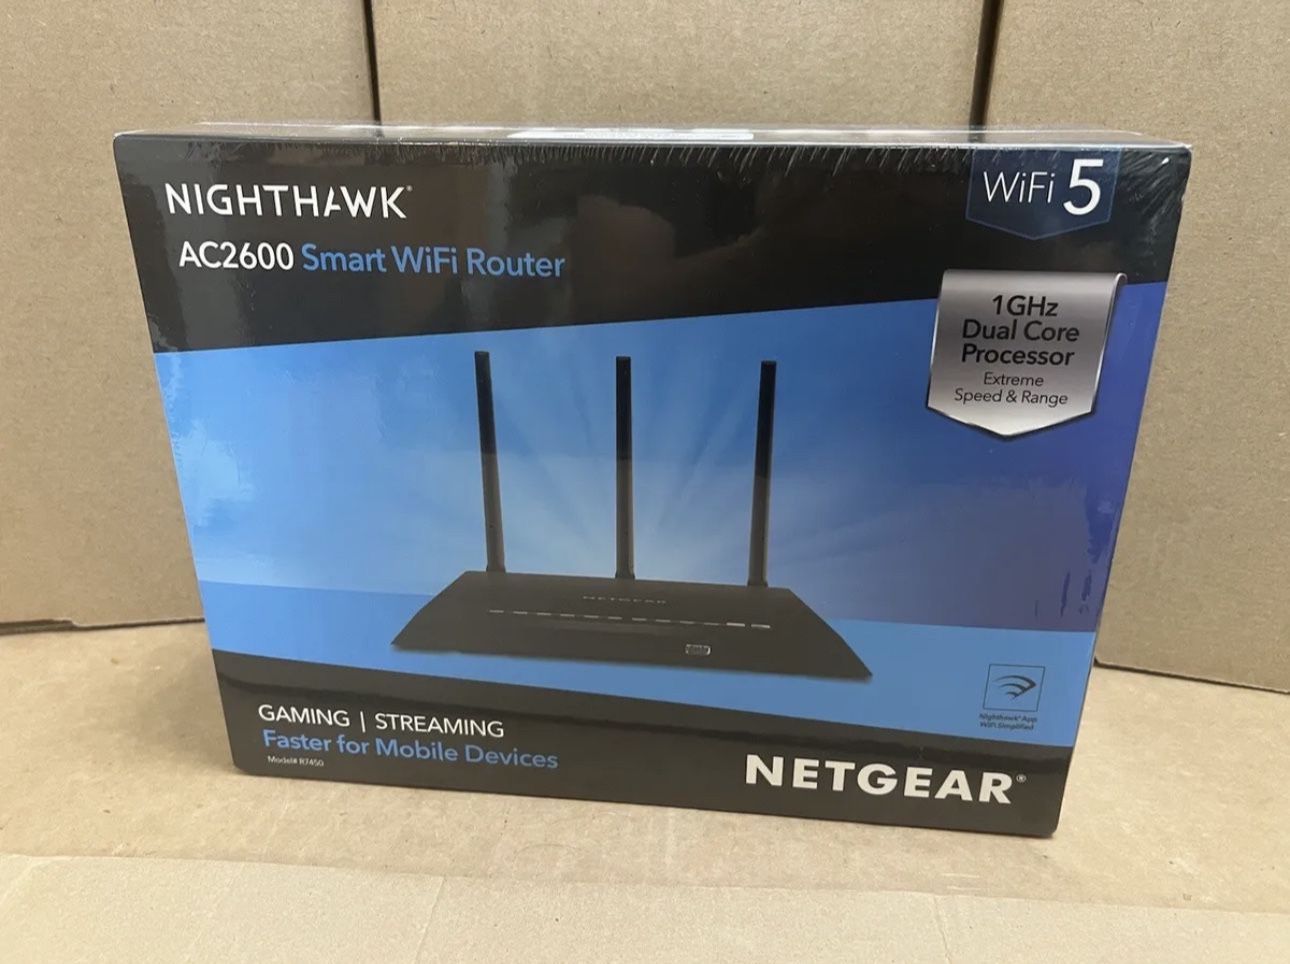 Brand New Netgear AC2600 R7450 Gaming Router